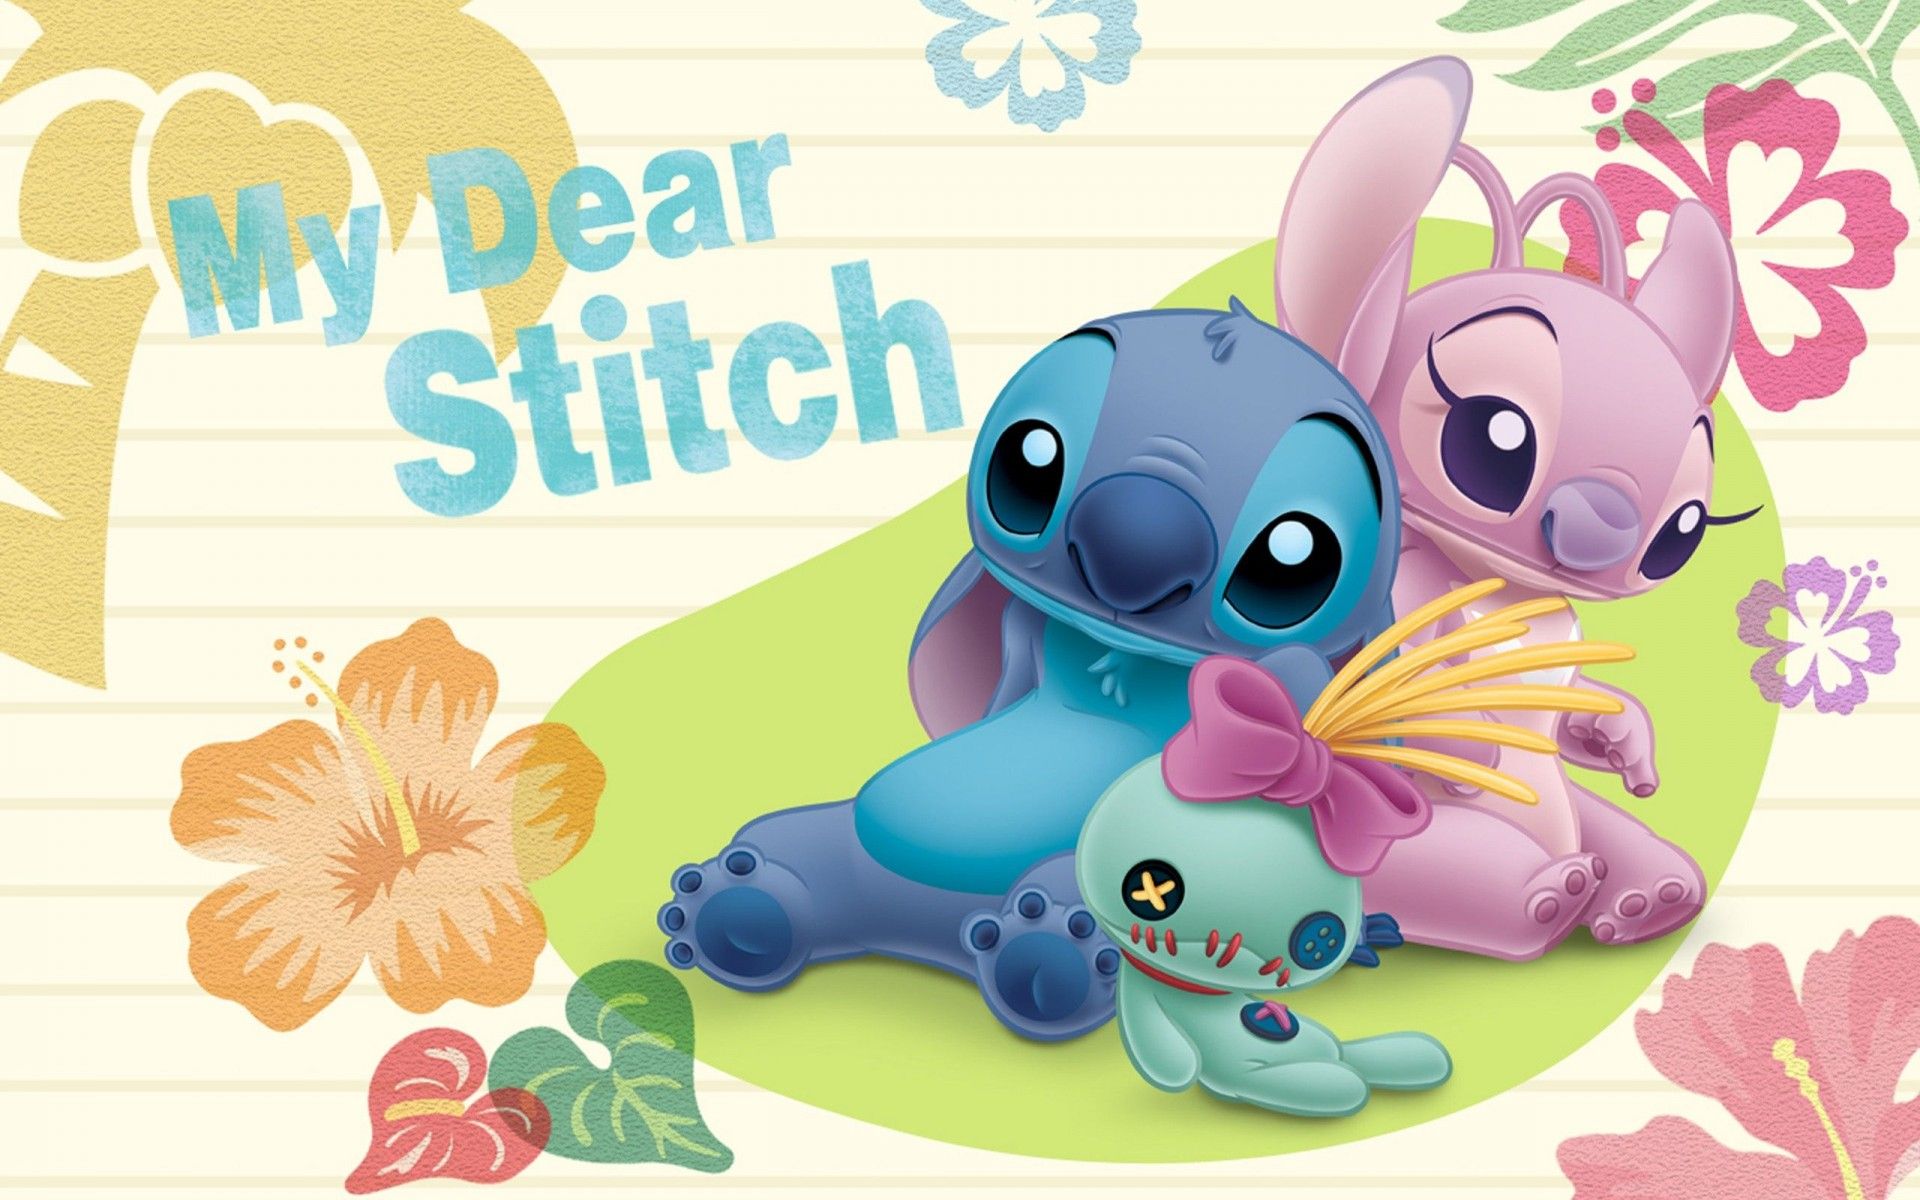 Stitch Wallpapers  Top 30 Best Stitch Wallpapers Download